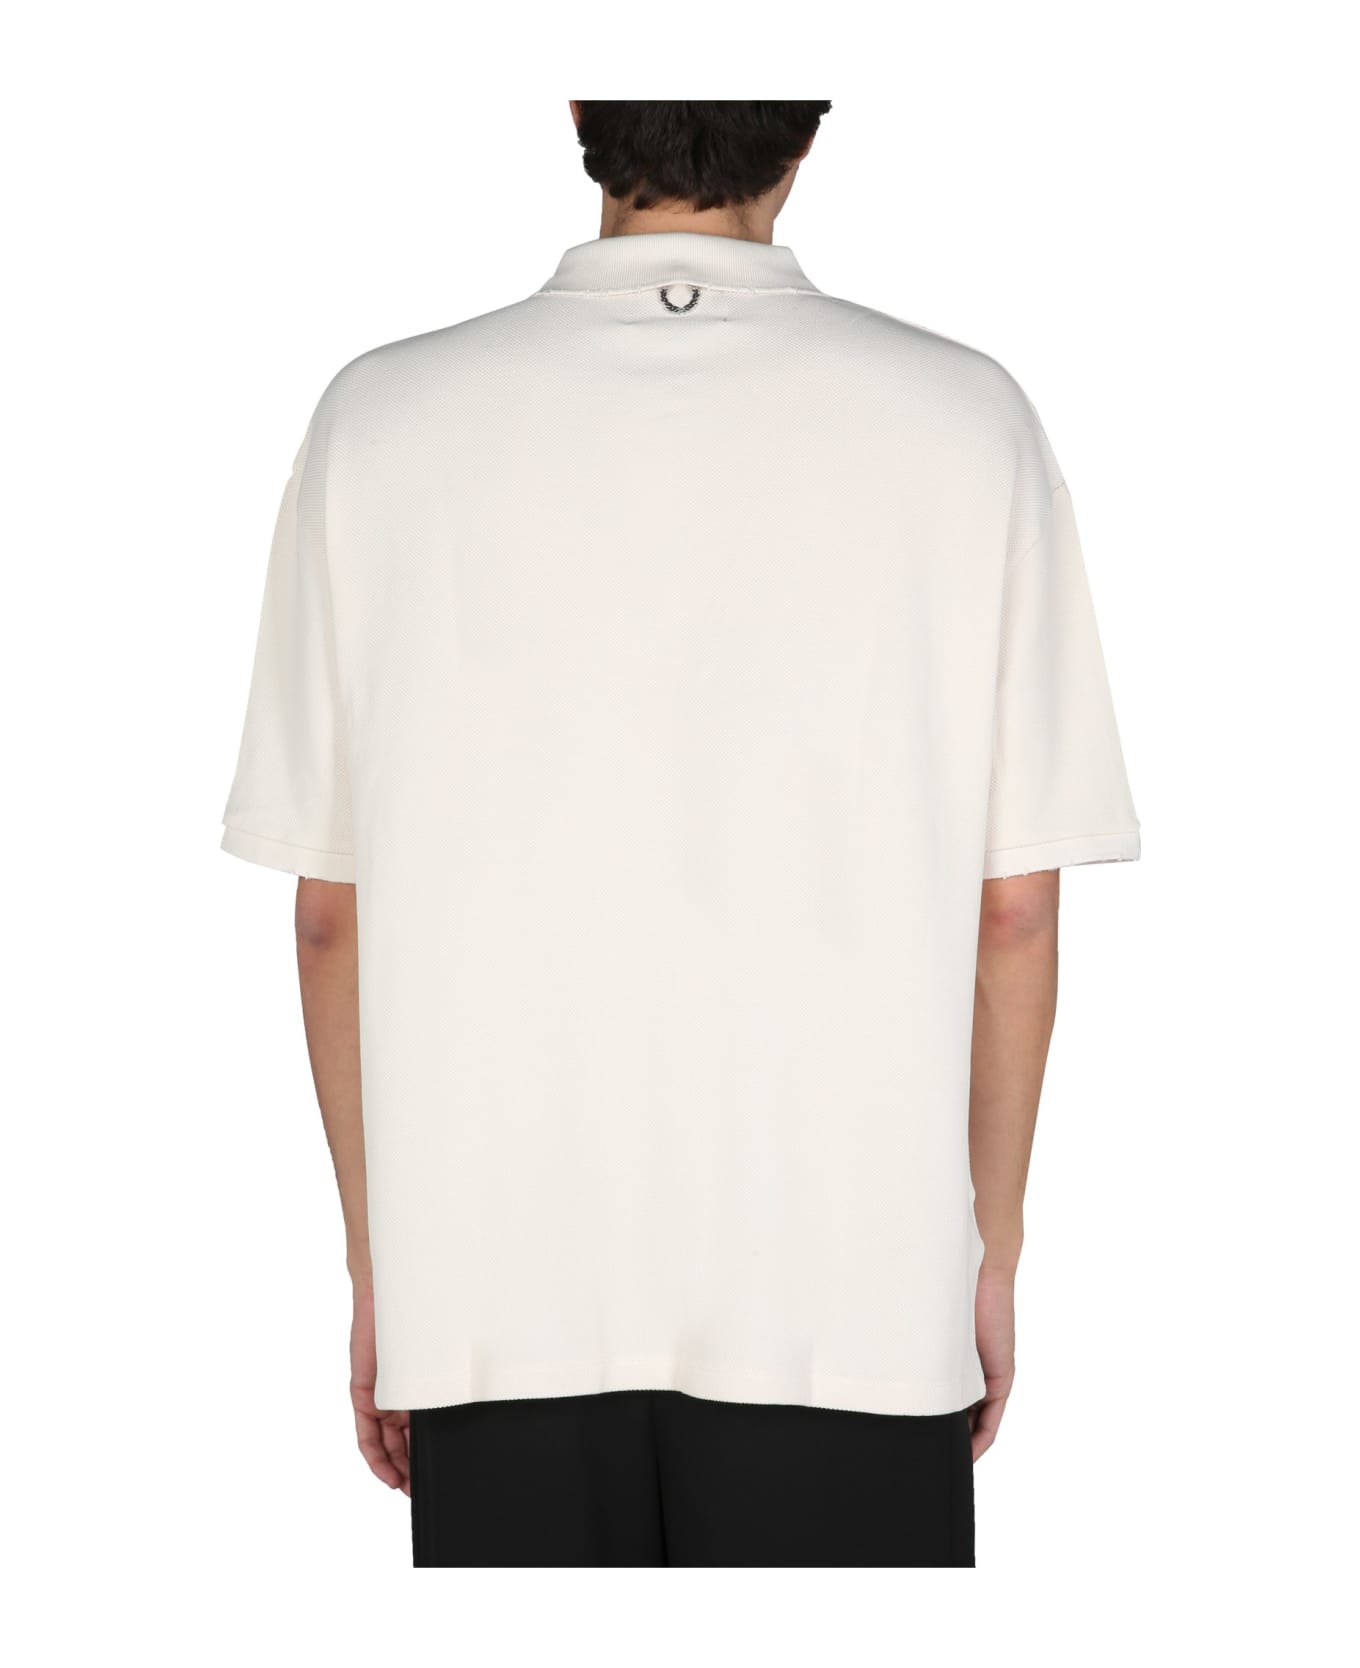 Fred Perry by Raf Simons Distressed Oversized Polo Shirt - CIPRIA